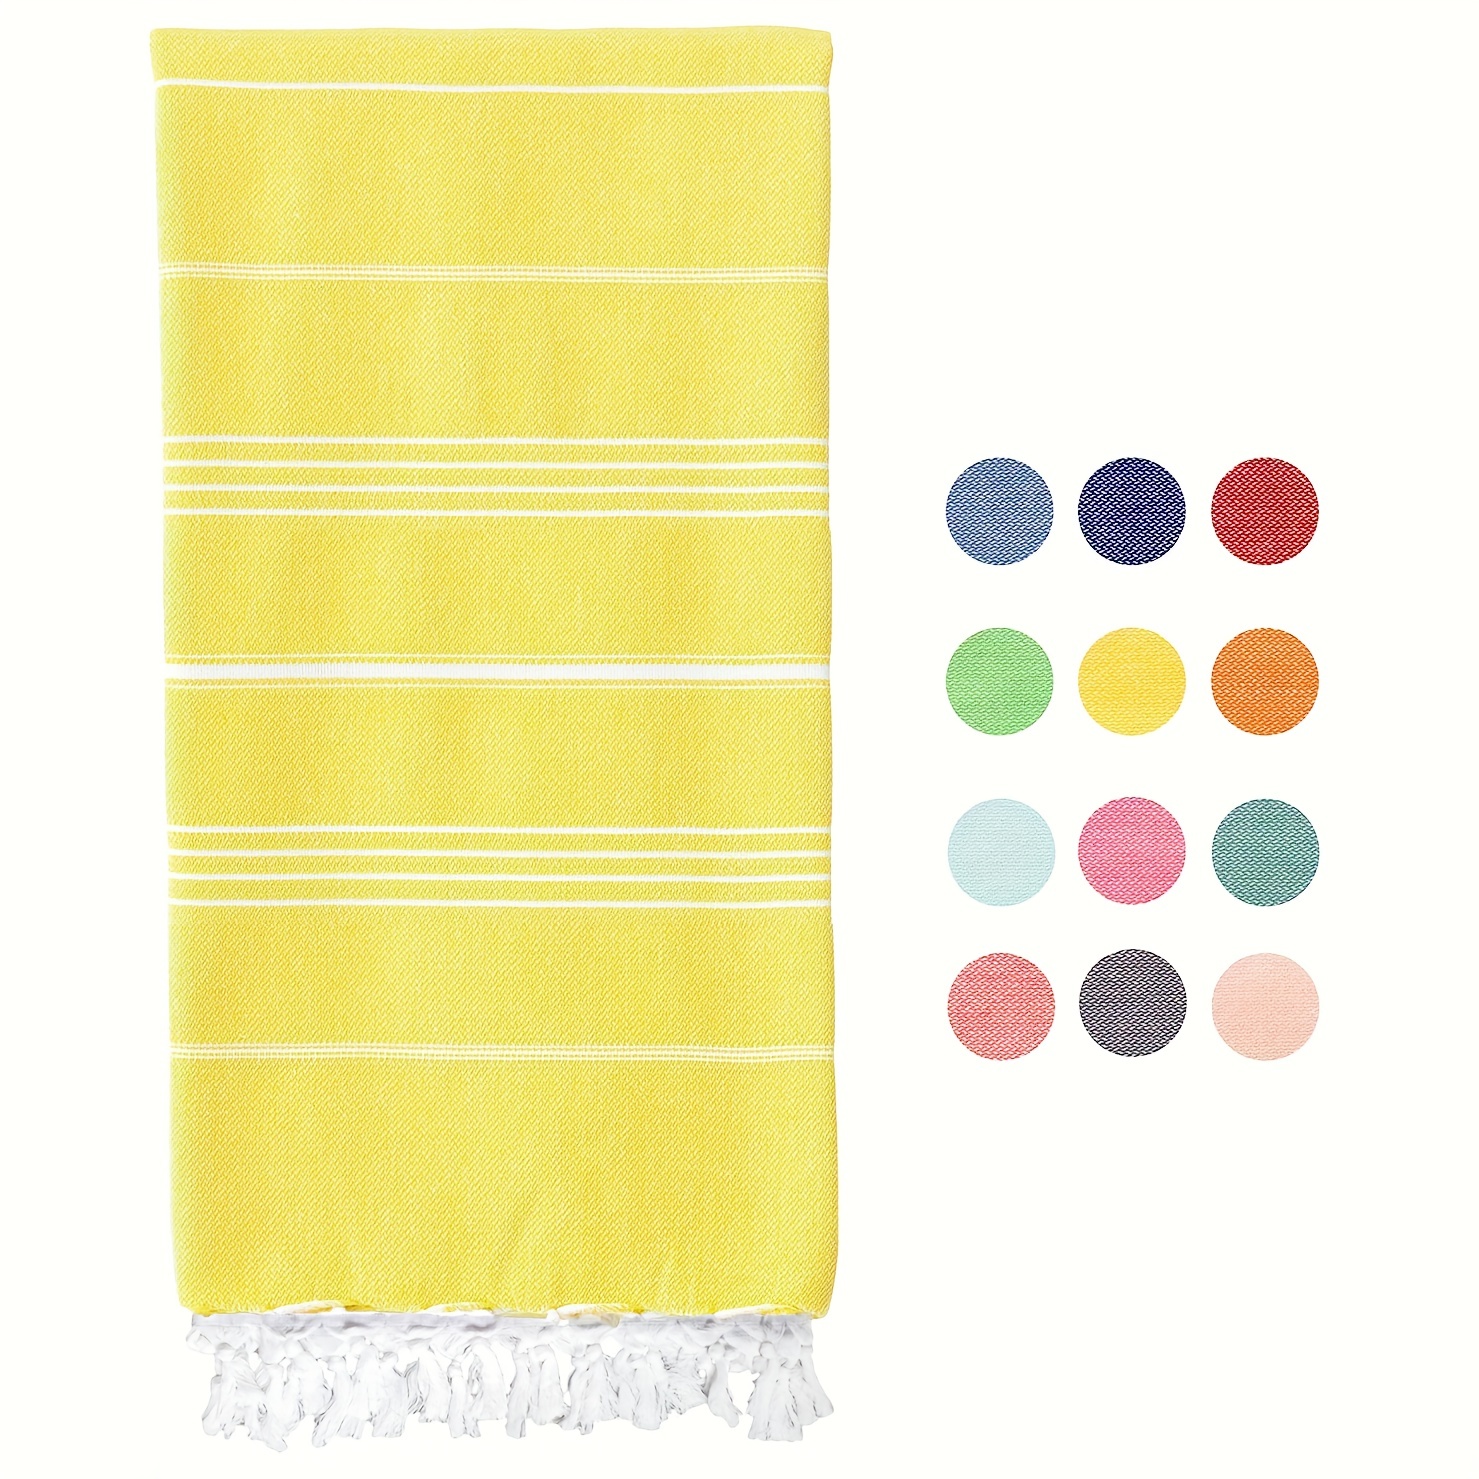 1pc Yellow Stripe Patterned Microfiber, Absorbent Towel For Bath, Rectangle  Towel, Beach Towel